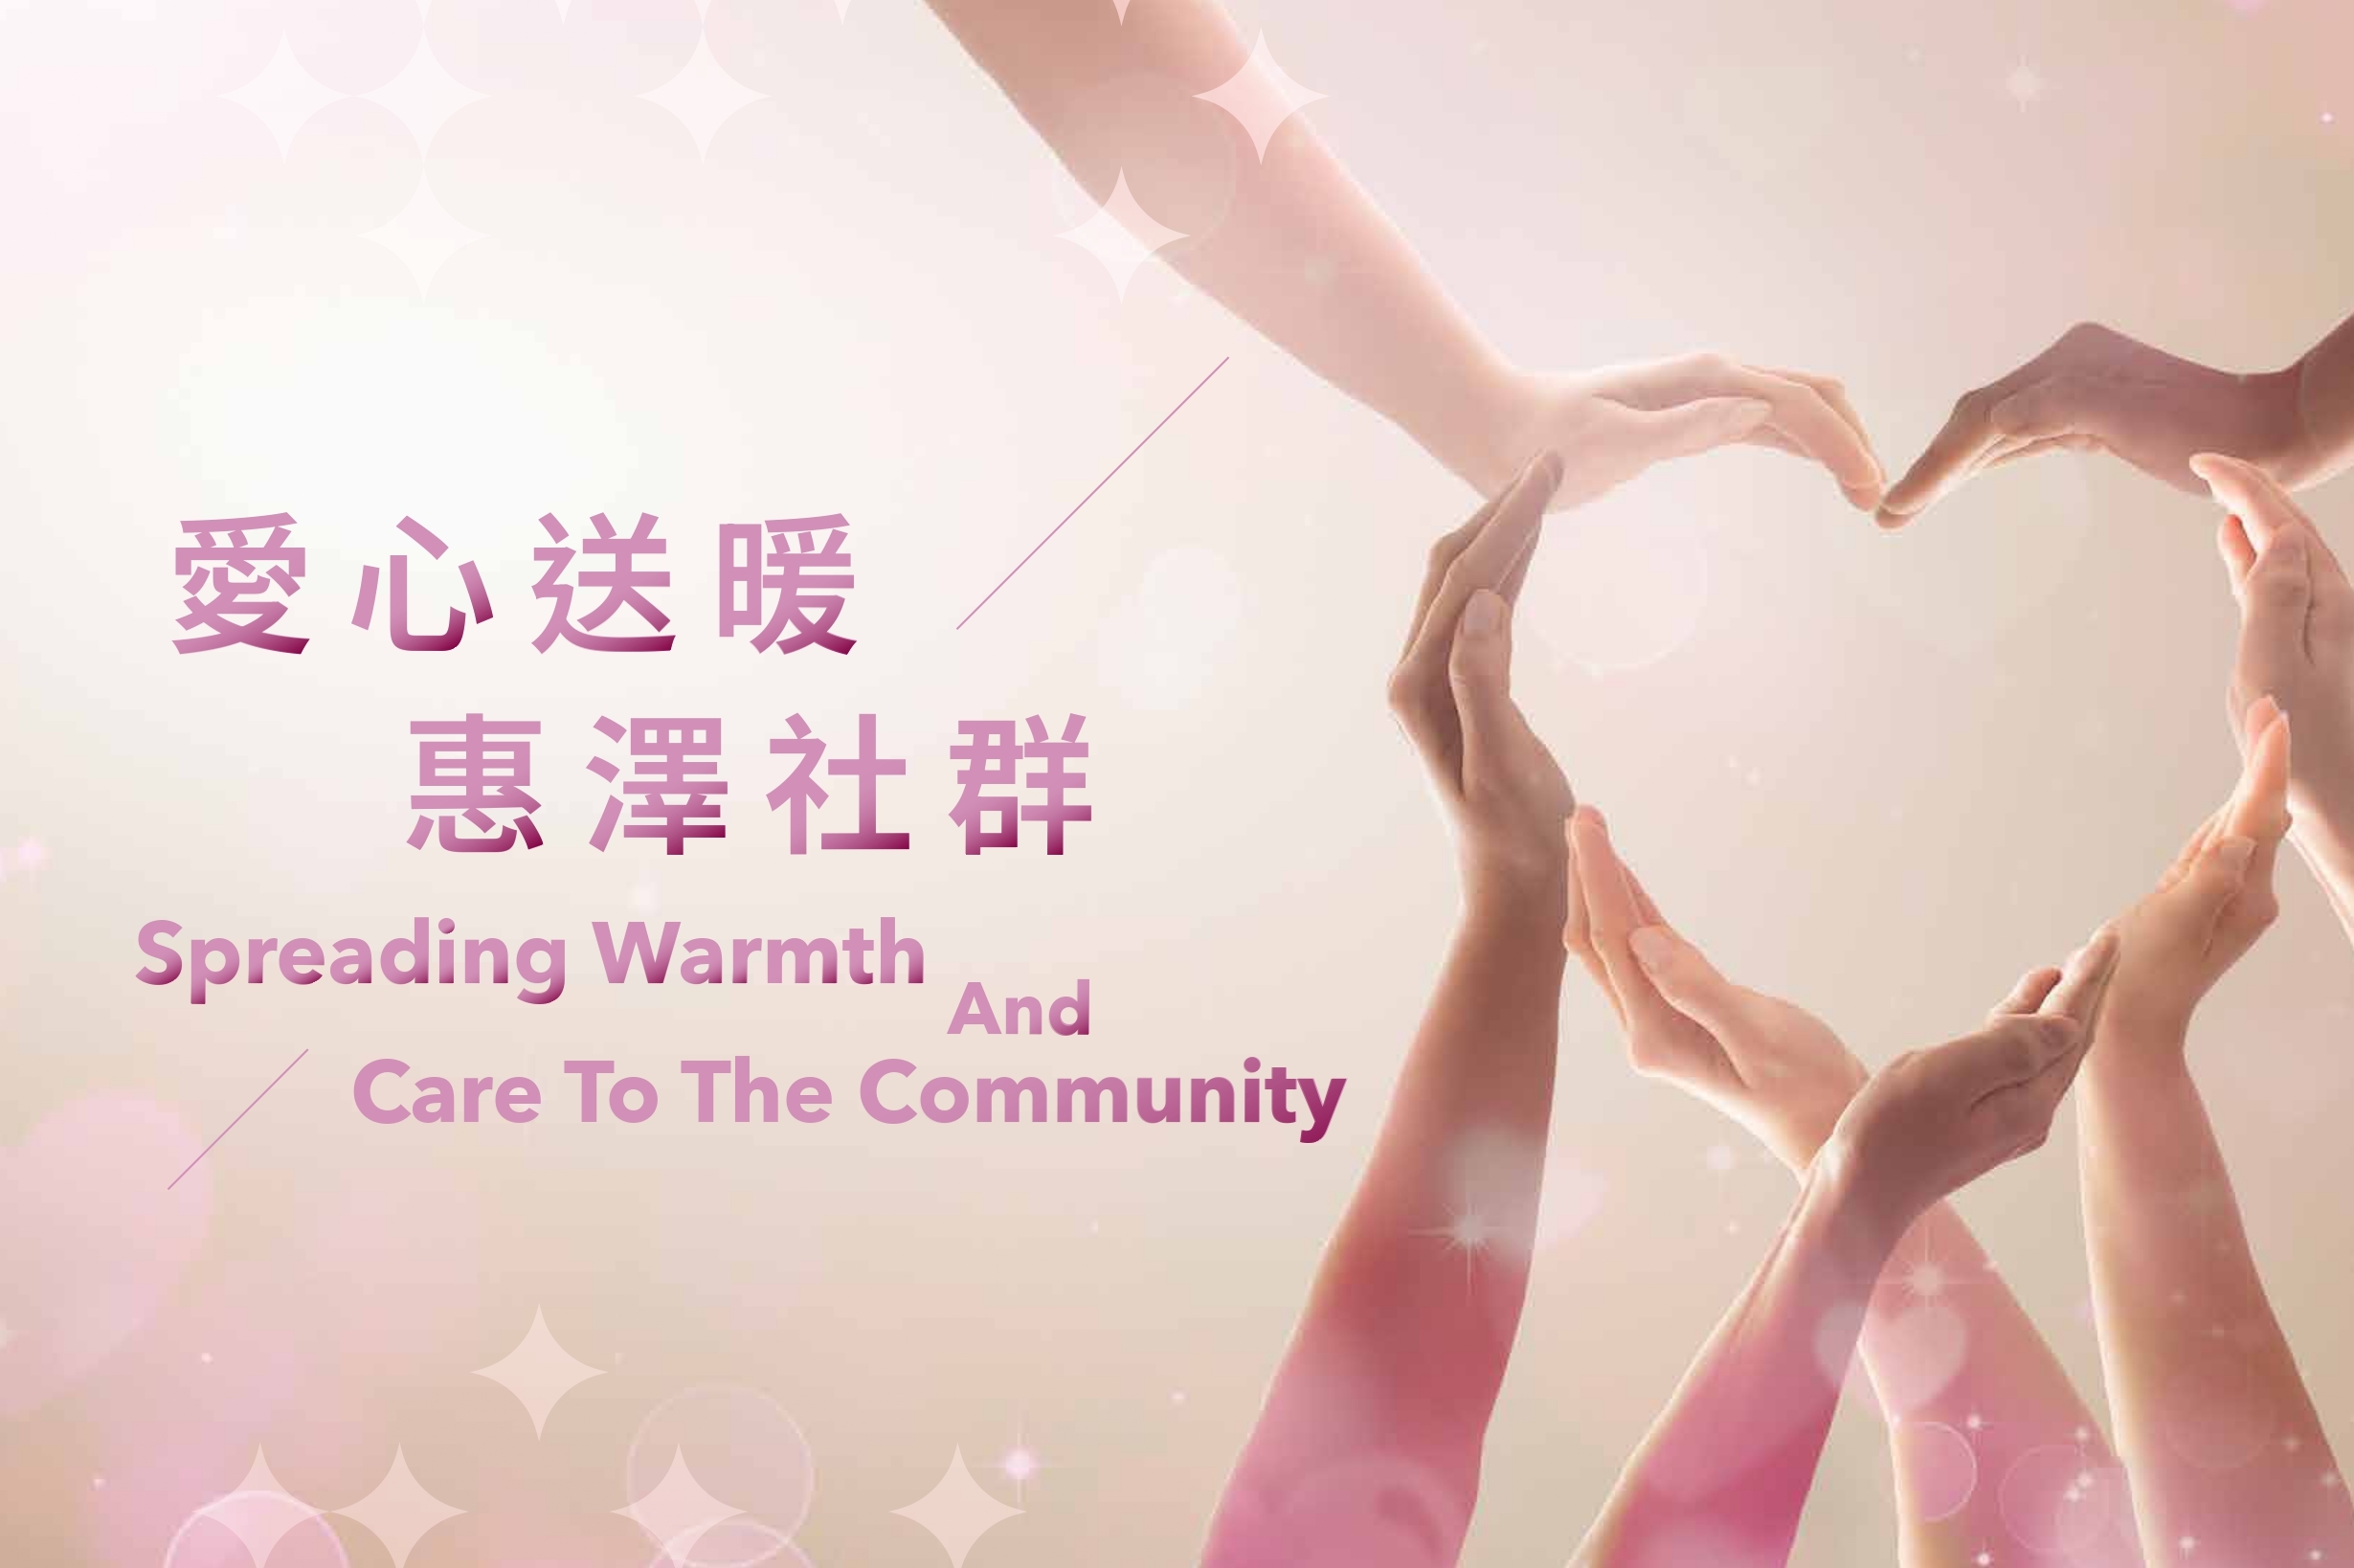 Spreading Warmth And Care To The Community